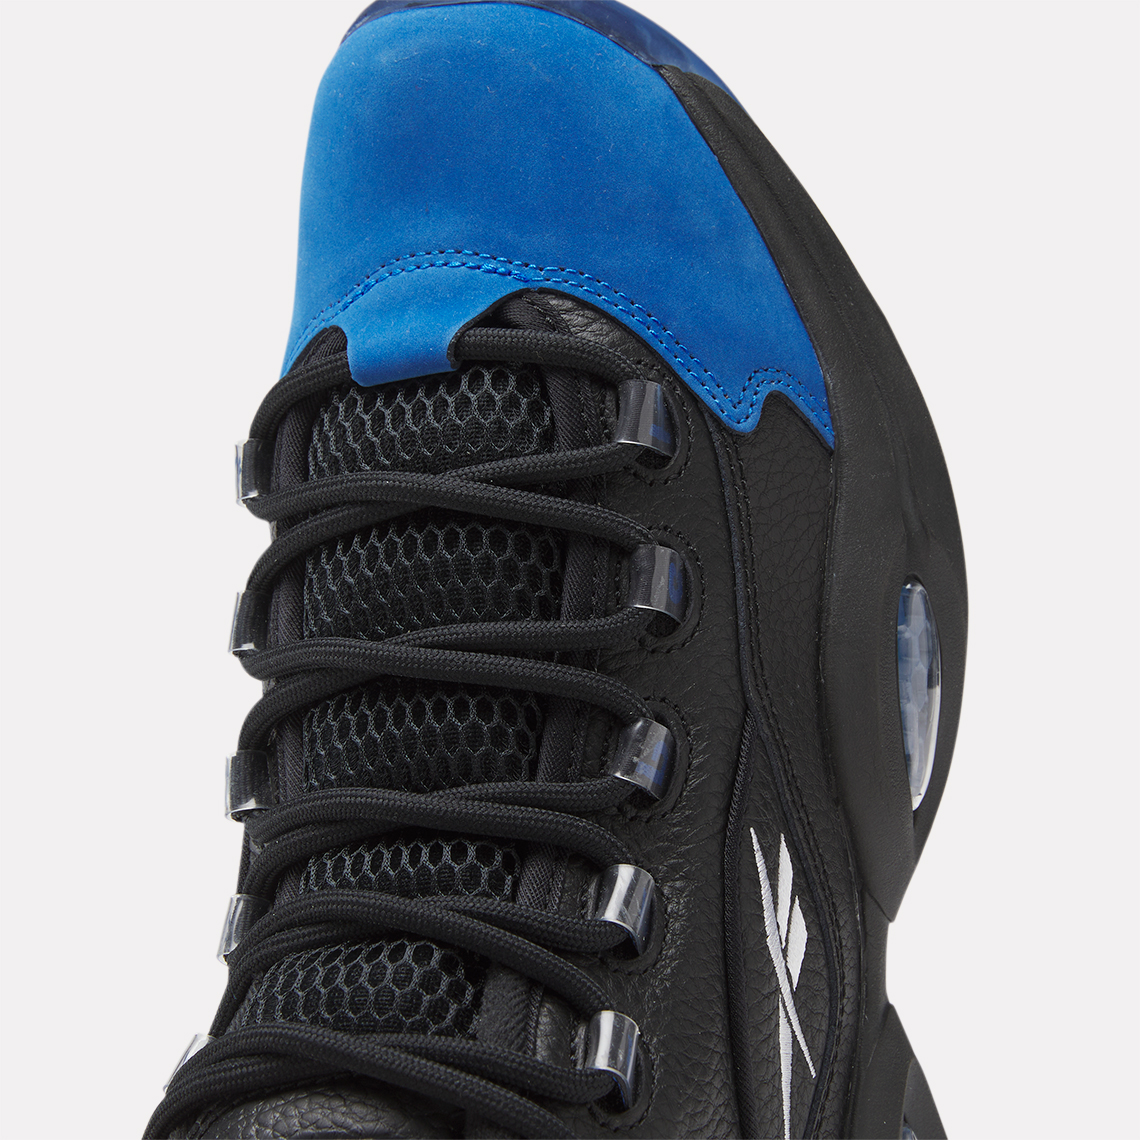 Reebok Question Mid Black And Blue Rb0057 1